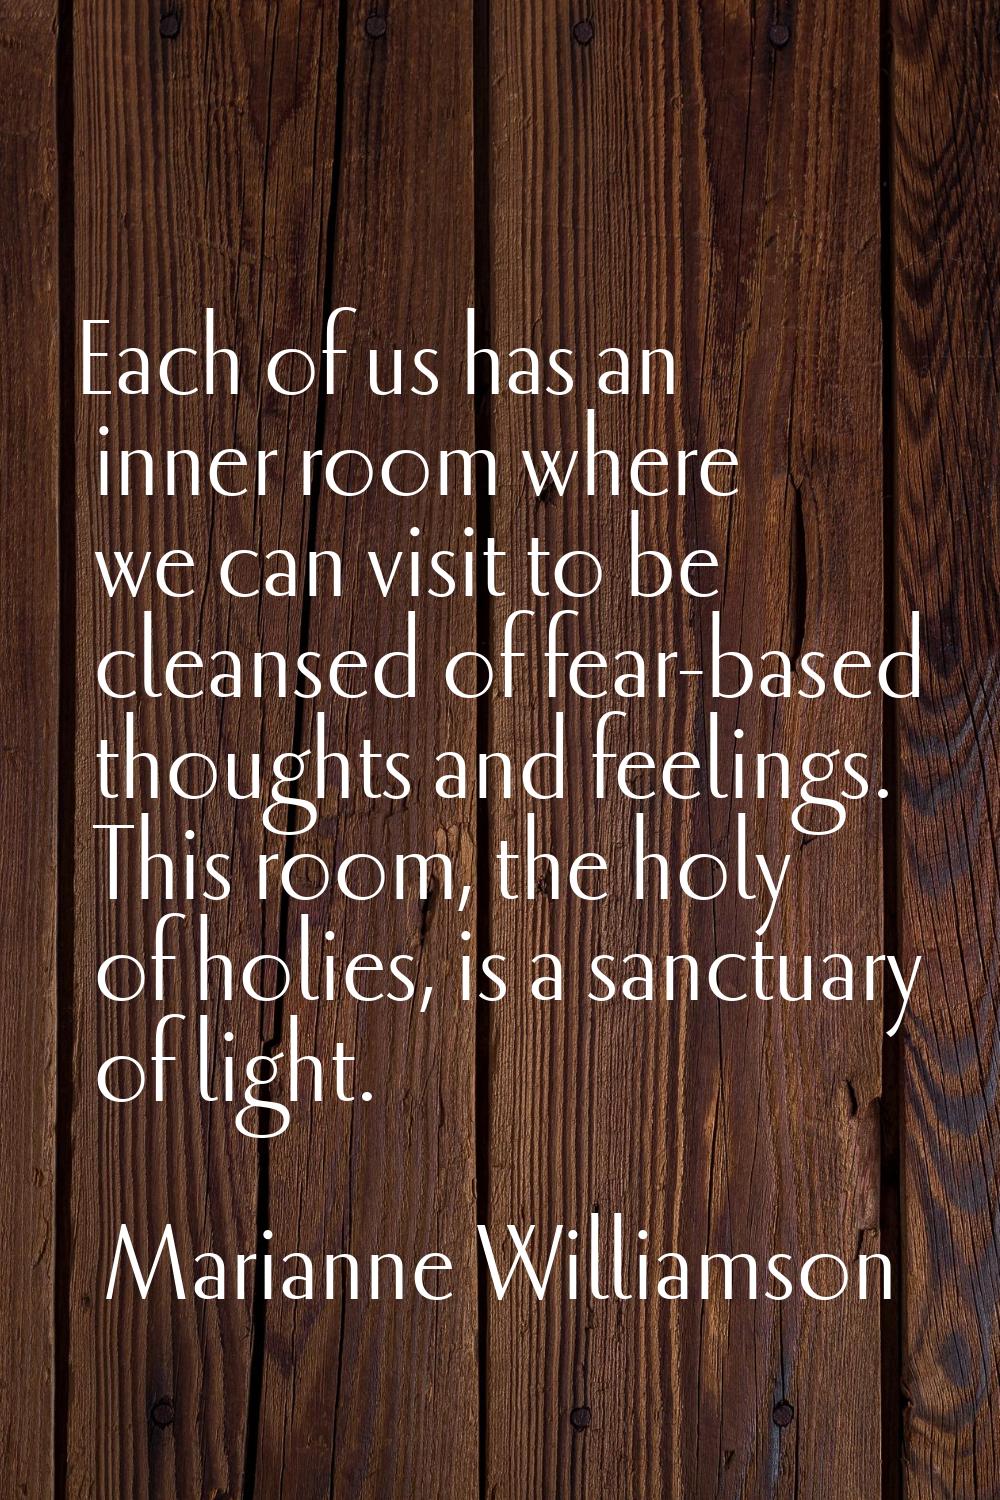 Each of us has an inner room where we can visit to be cleansed of fear-based thoughts and feelings.